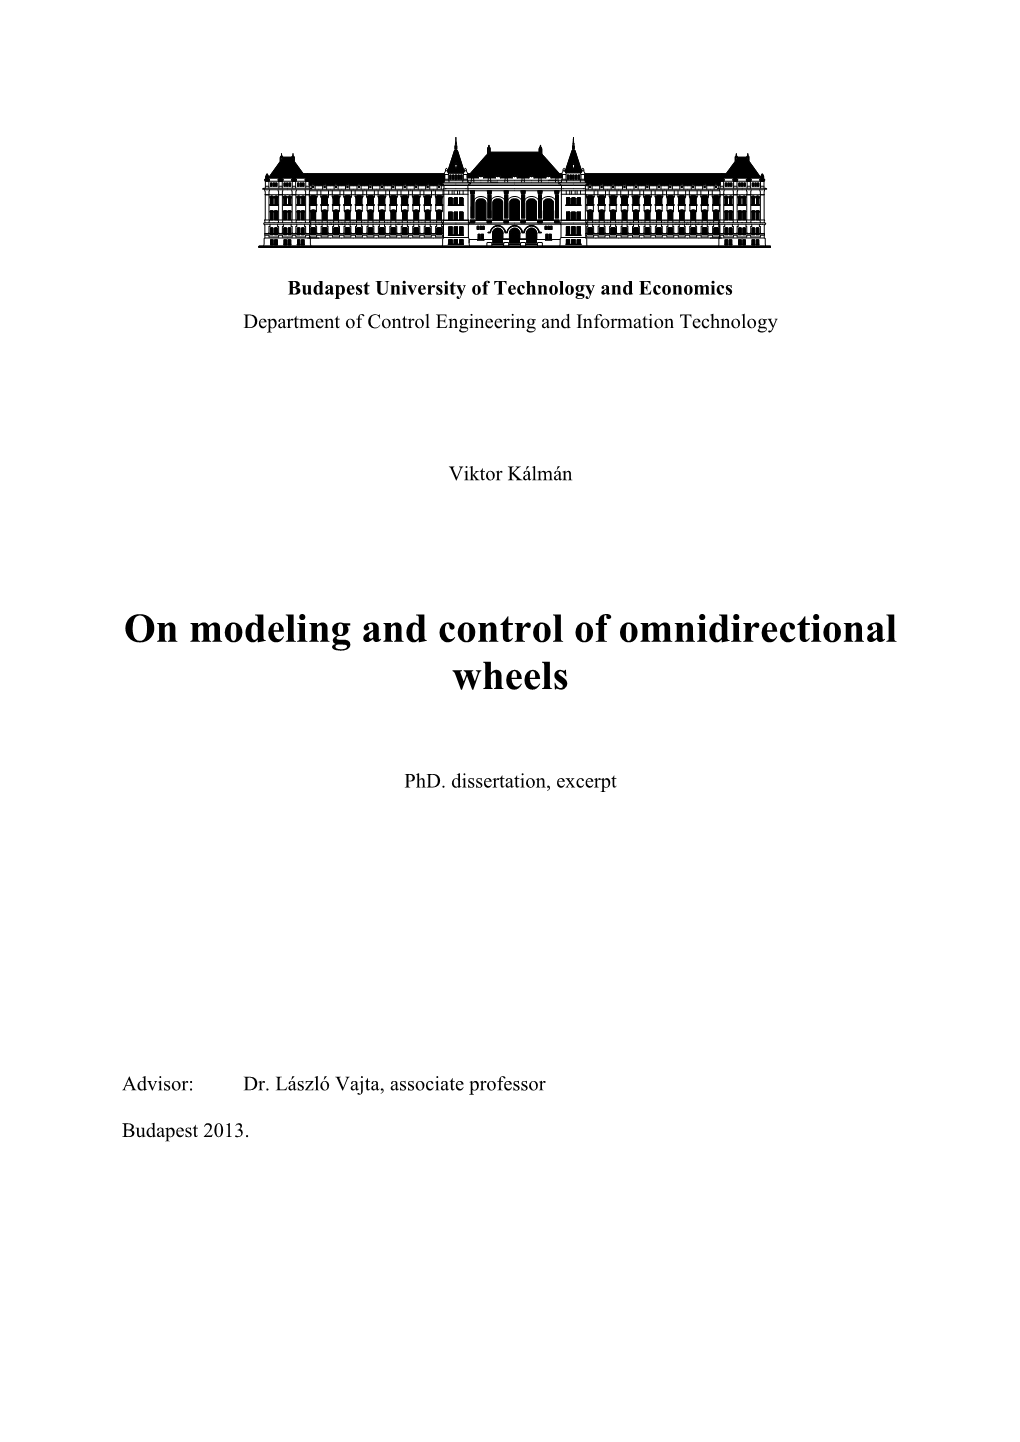 On Modeling and Control of Omnidirectional Wheels